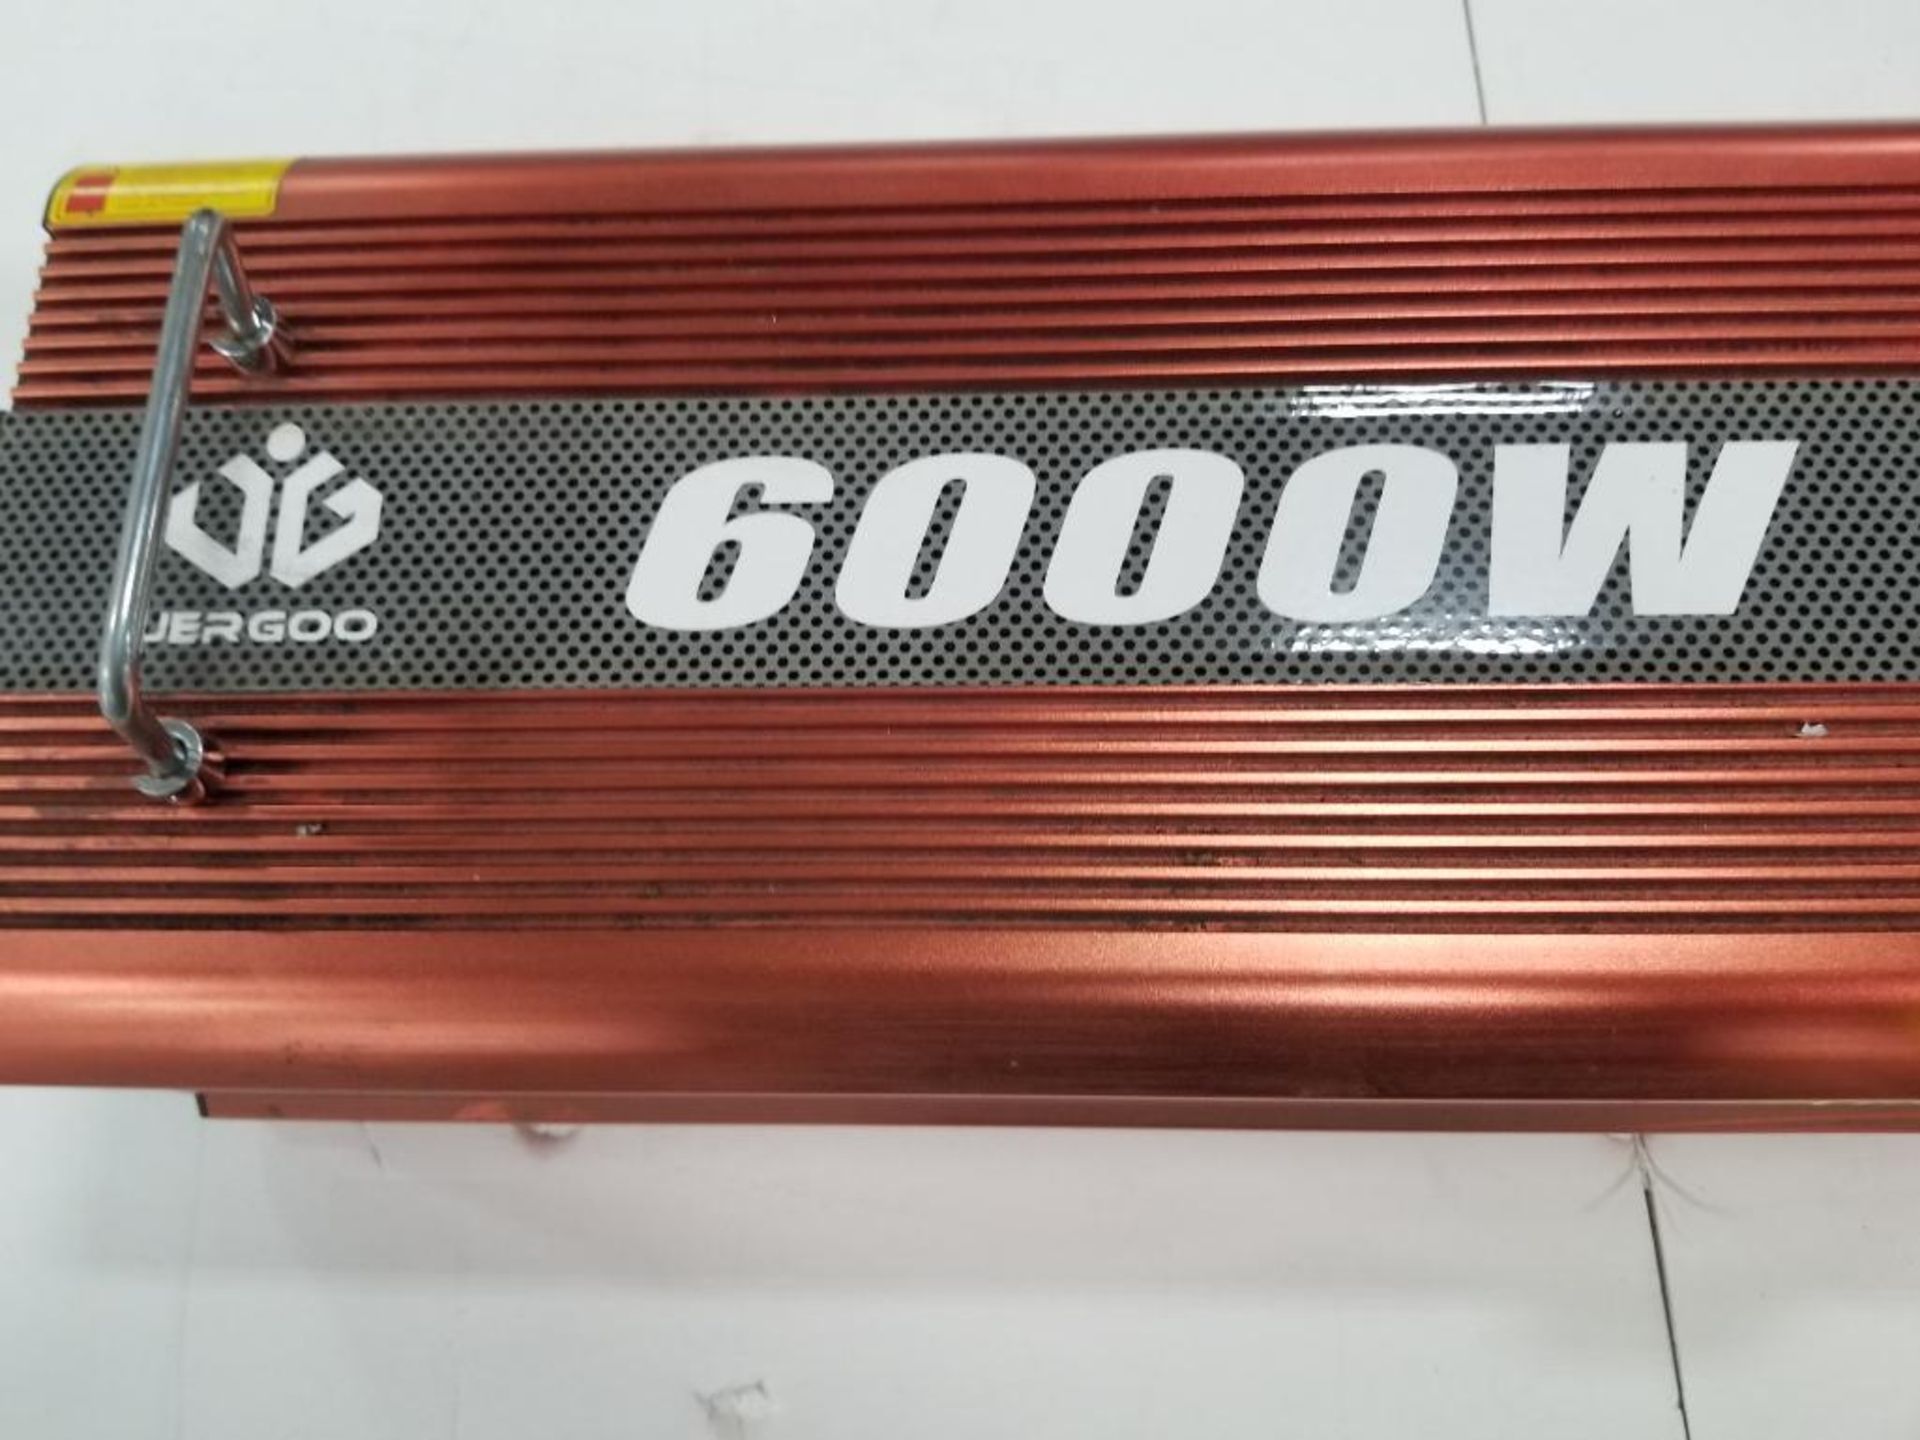 Jergoo 6000W power inverter with charger. New no box. - Image 2 of 6